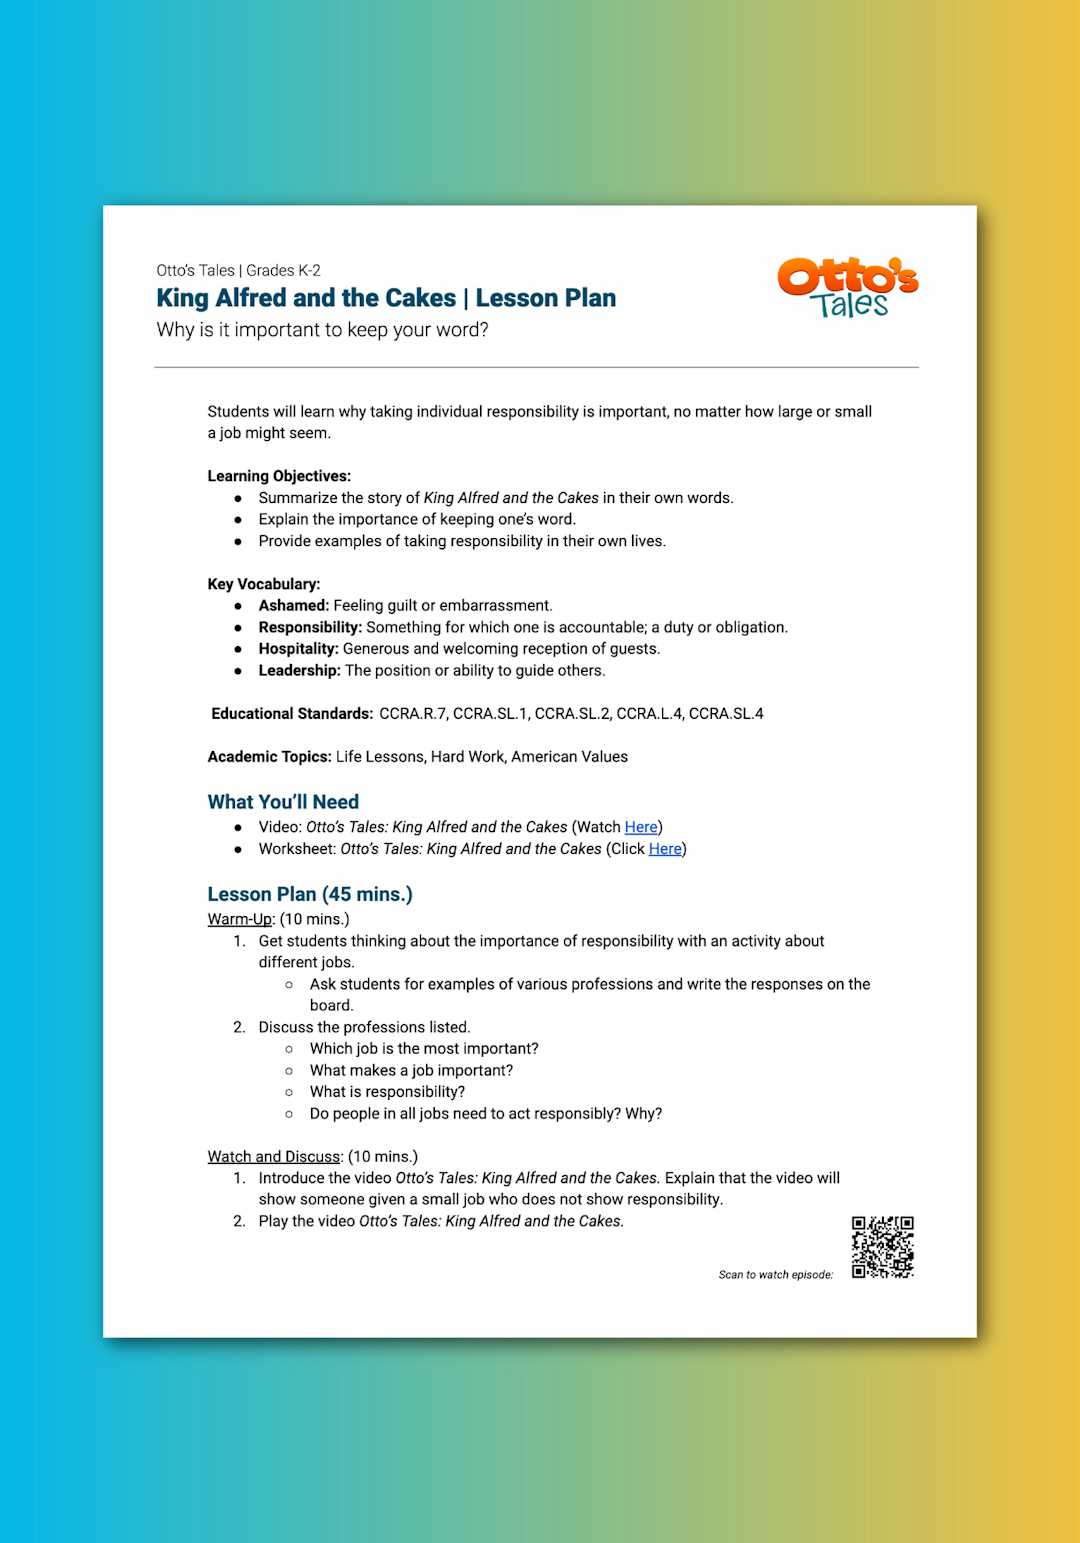 "Otto's Tales: King Alfred and the Cakes" Lesson Plan